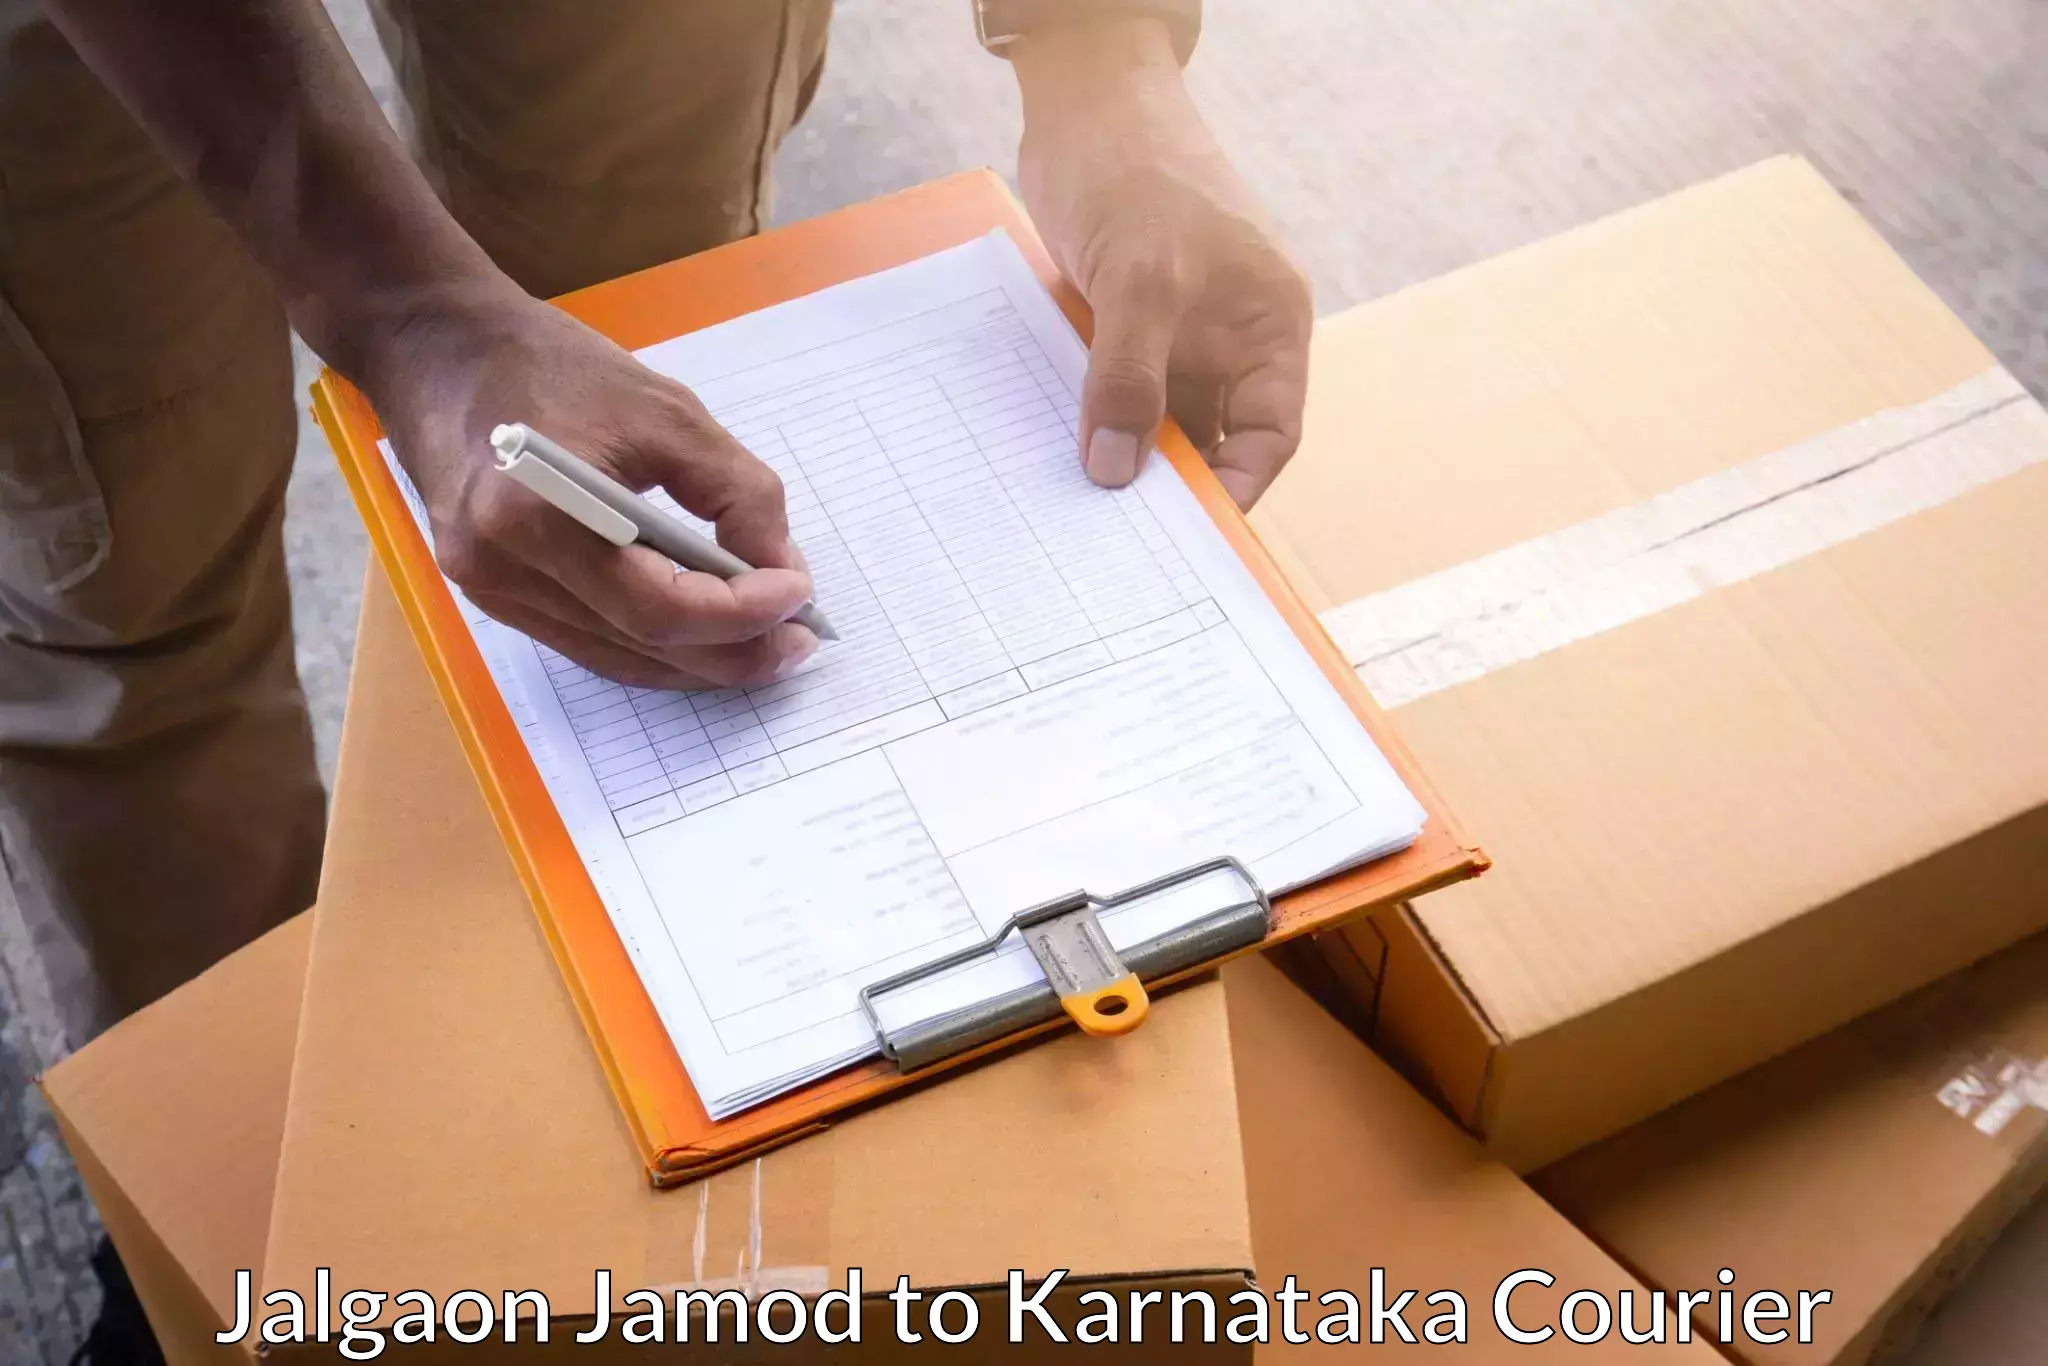 Next-generation courier services Jalgaon Jamod to Manipal Academy of Higher Education